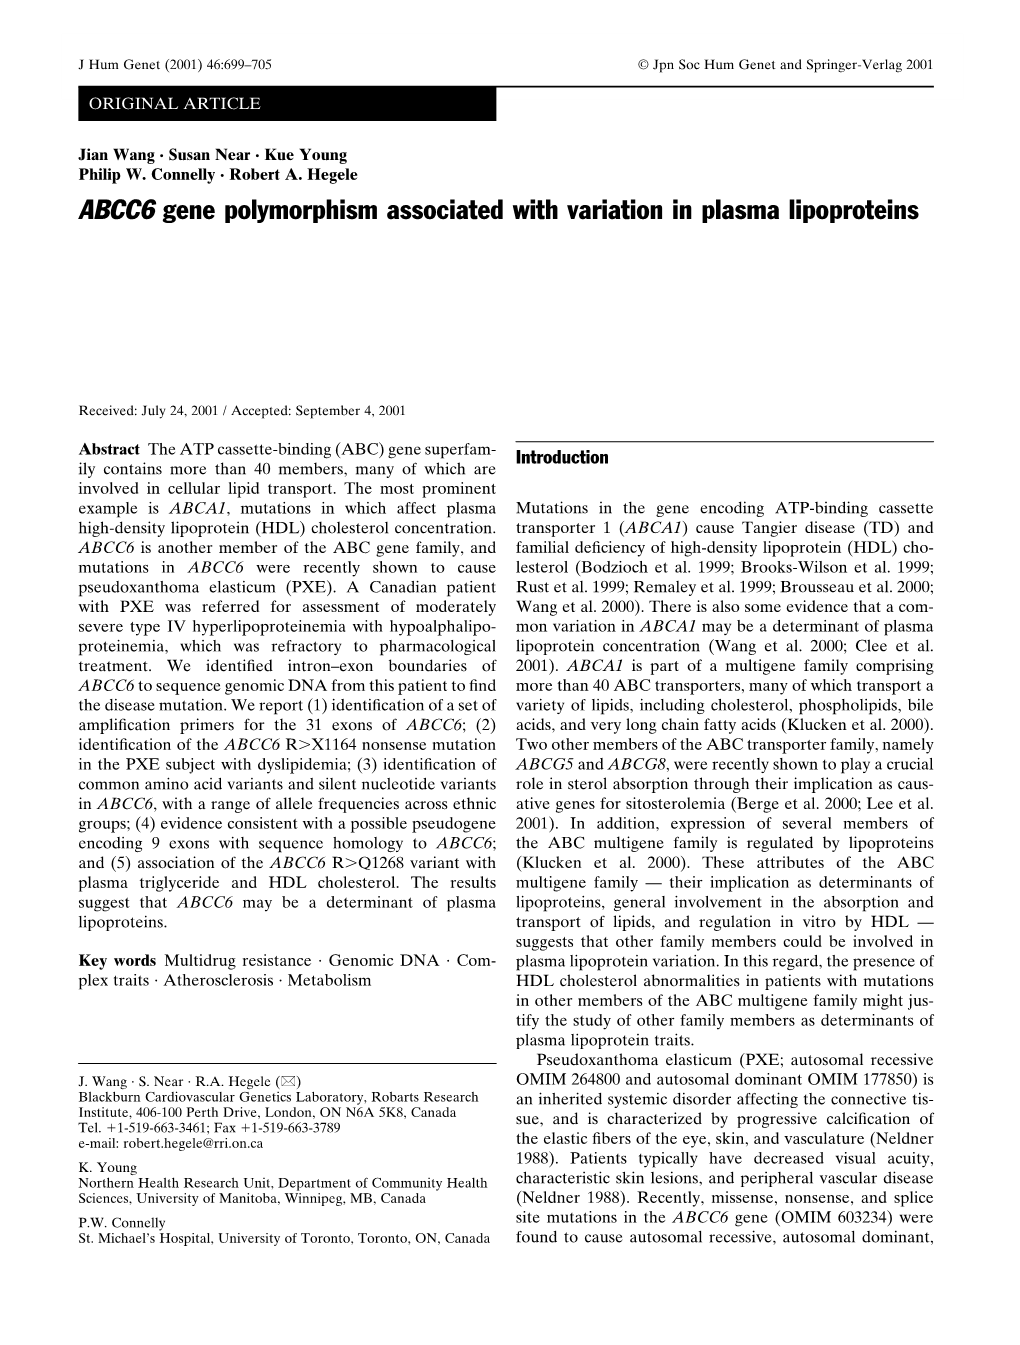 ABCC6 Gene Polymorphism Associated with Variation in Plasma Lipoproteins